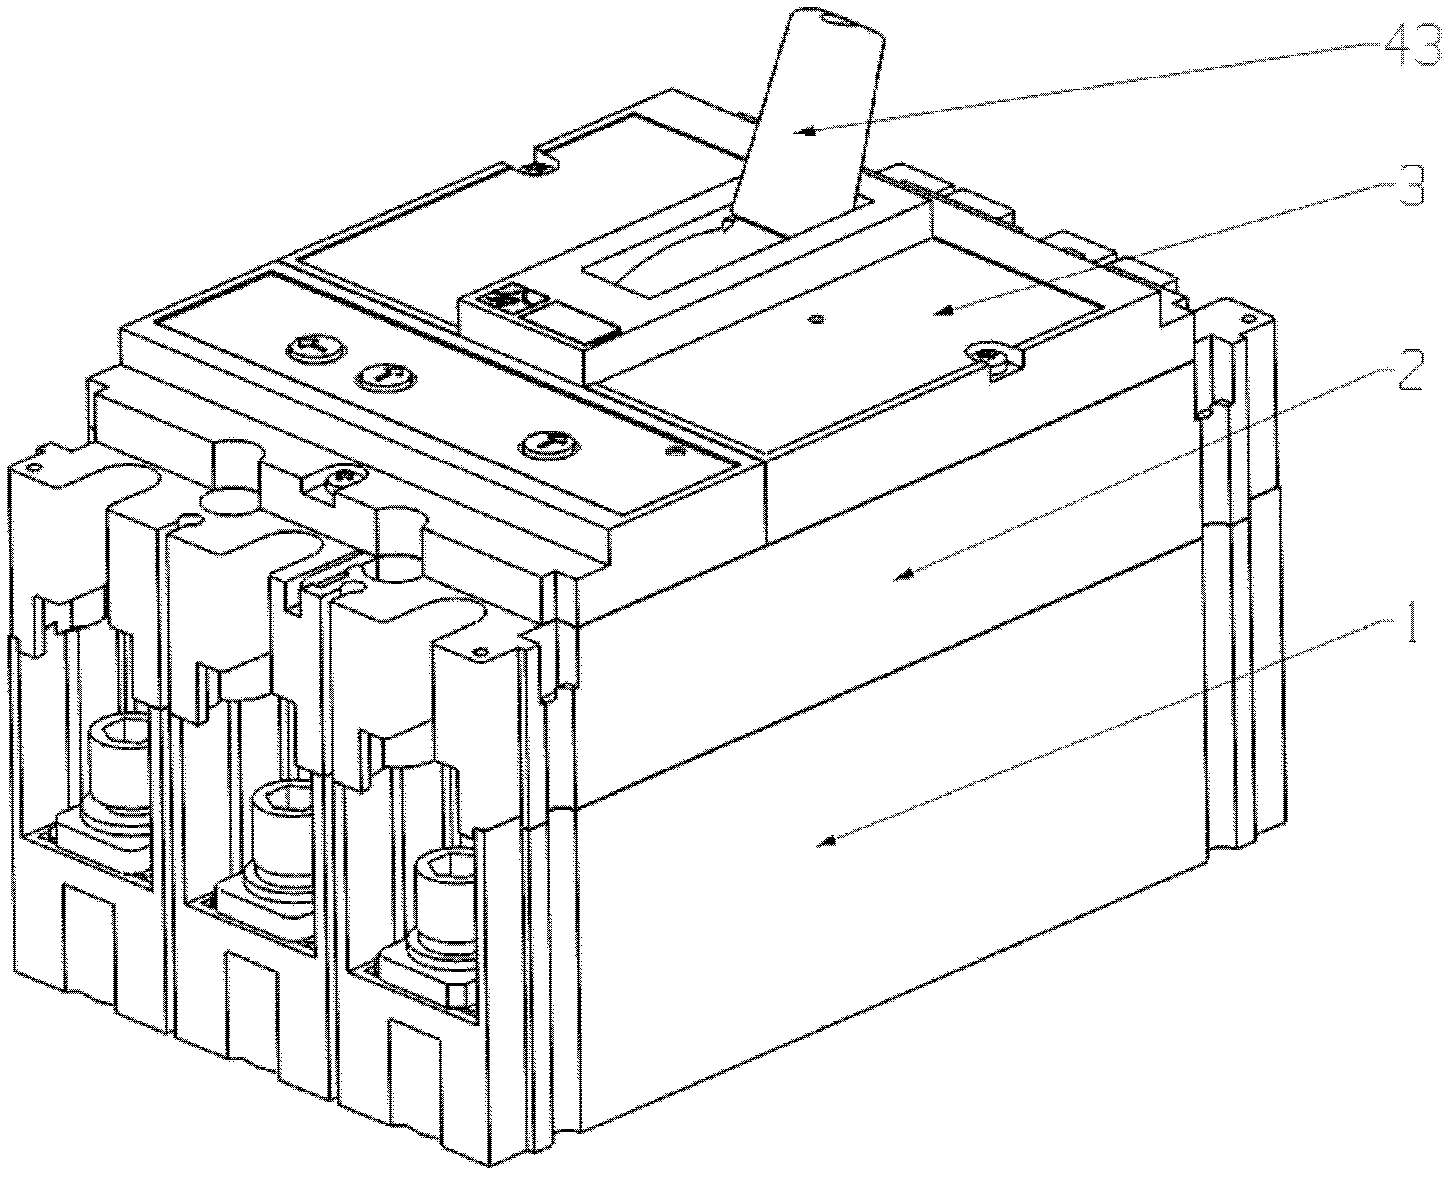 Low-voltage circuit breaker with pneumatic tripping device